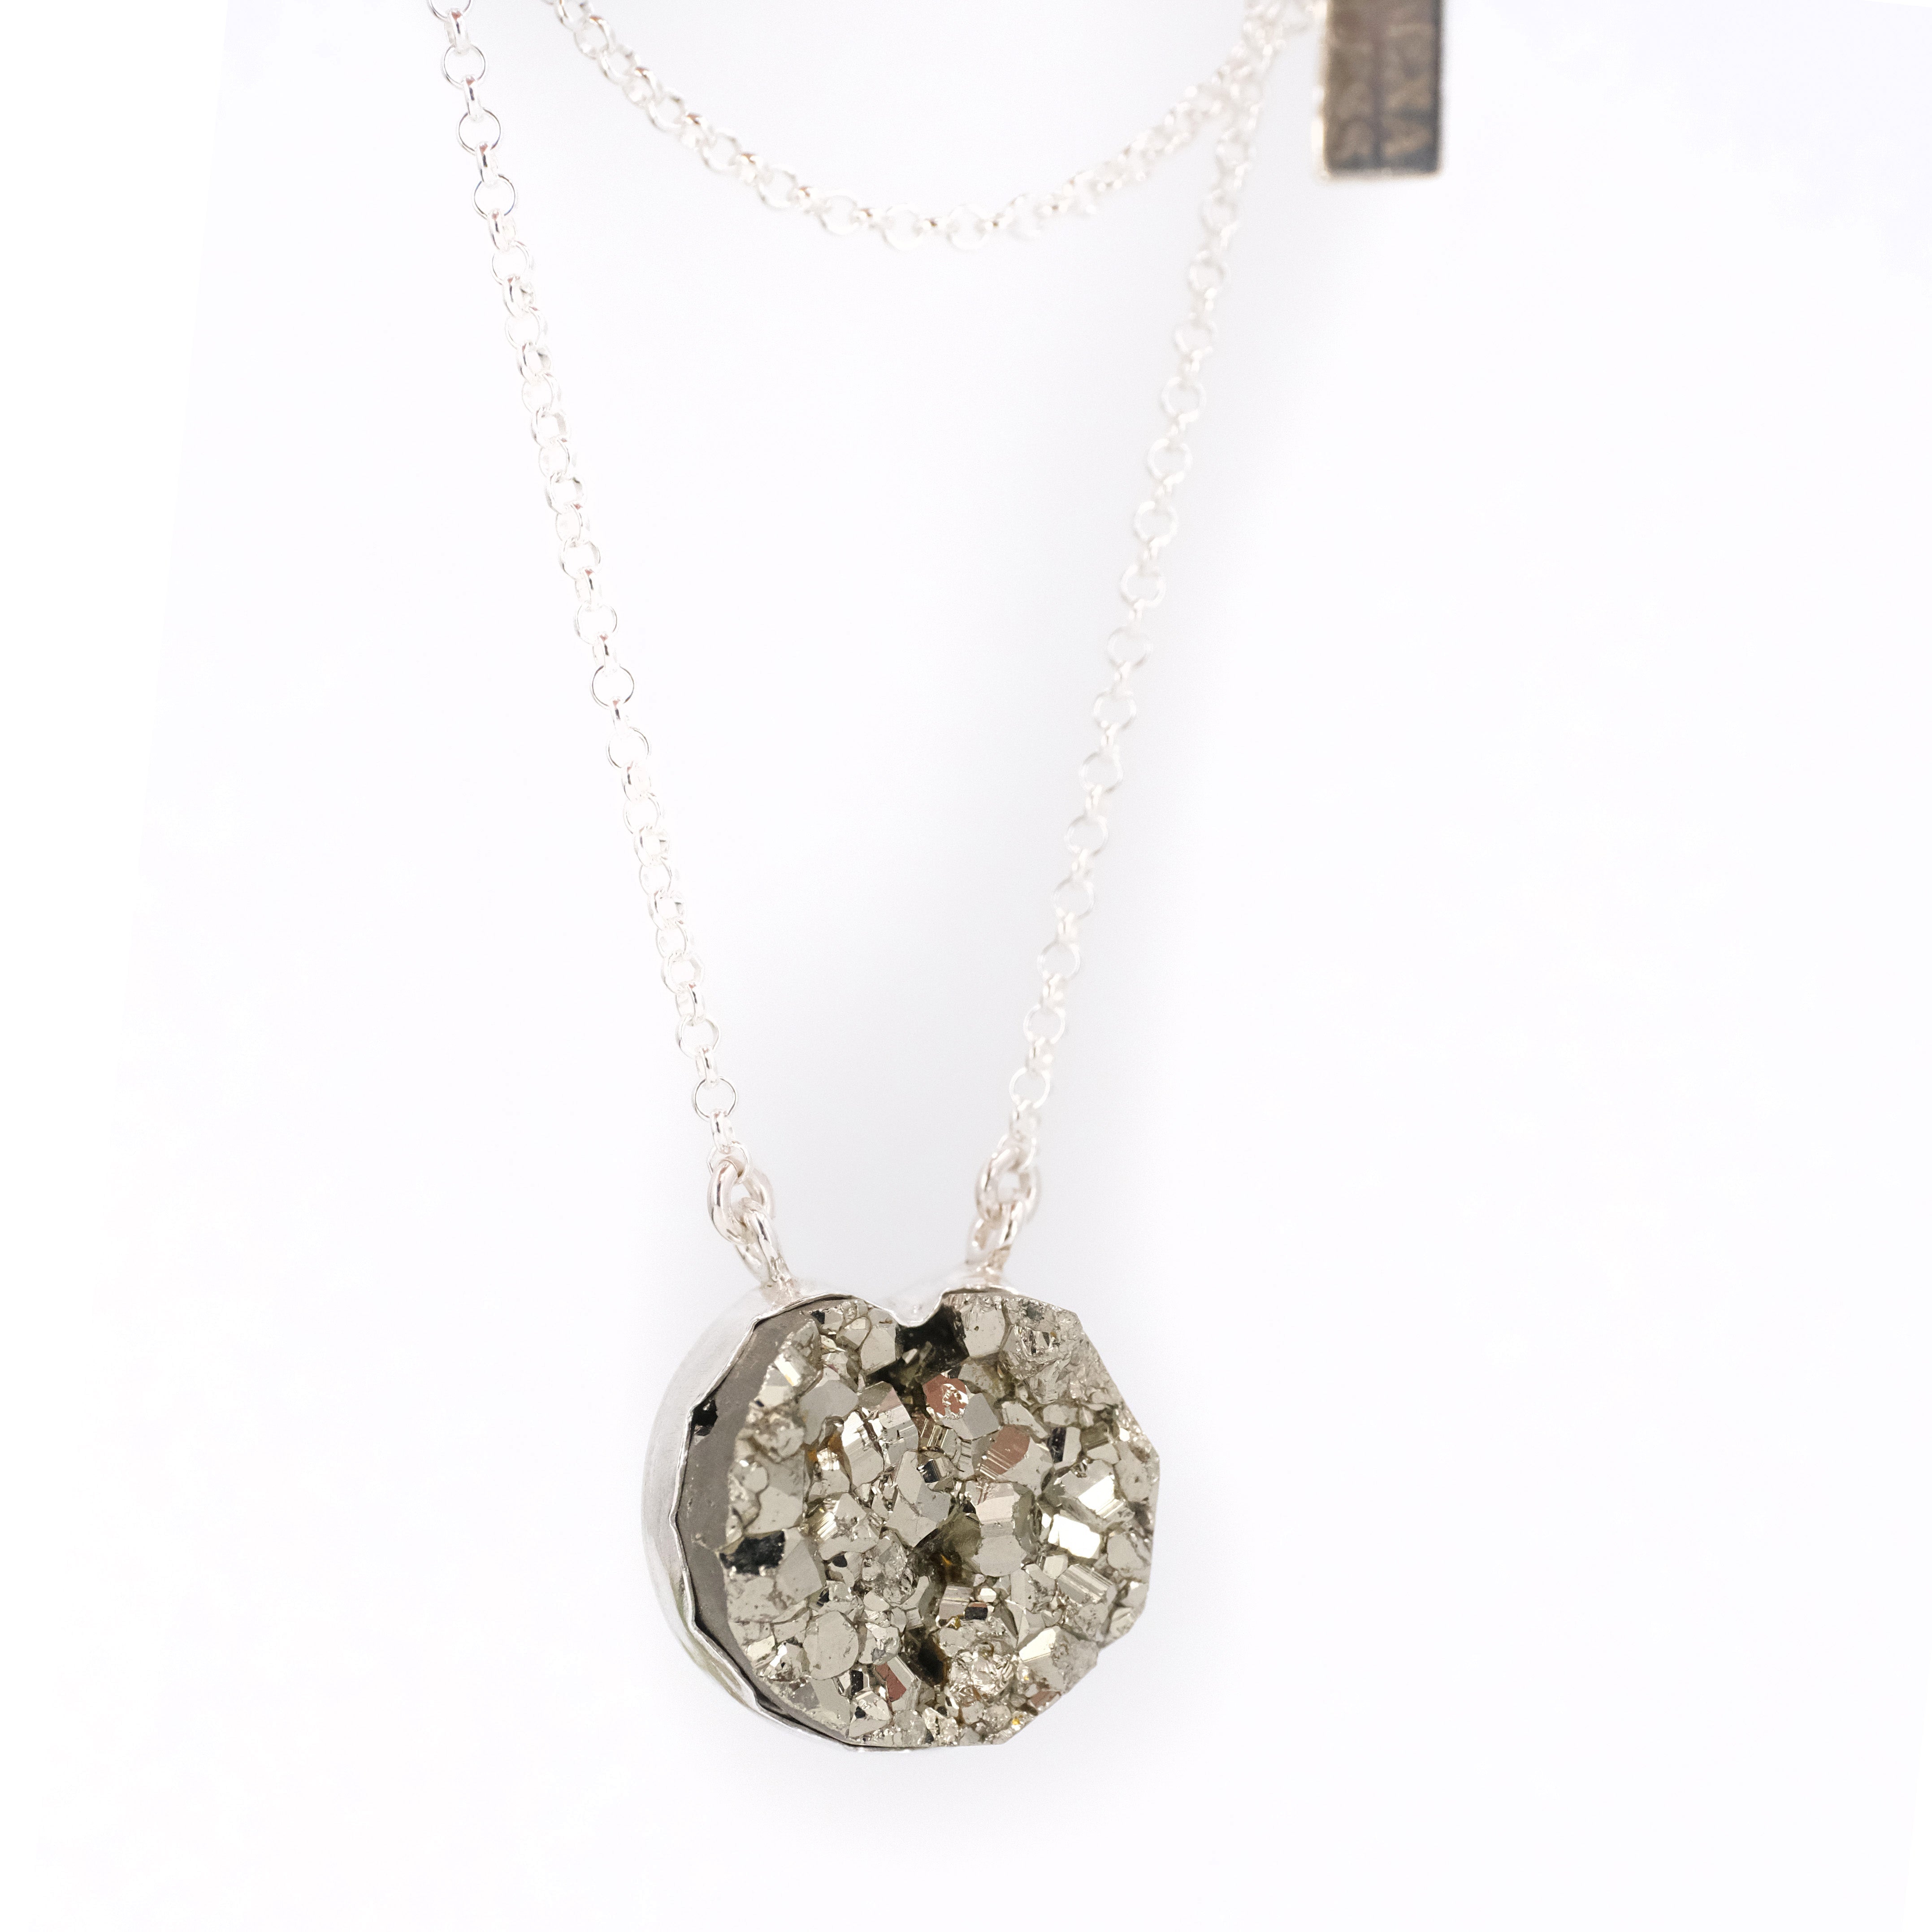 Pyrite Crevasse Necklace - One of a Kind